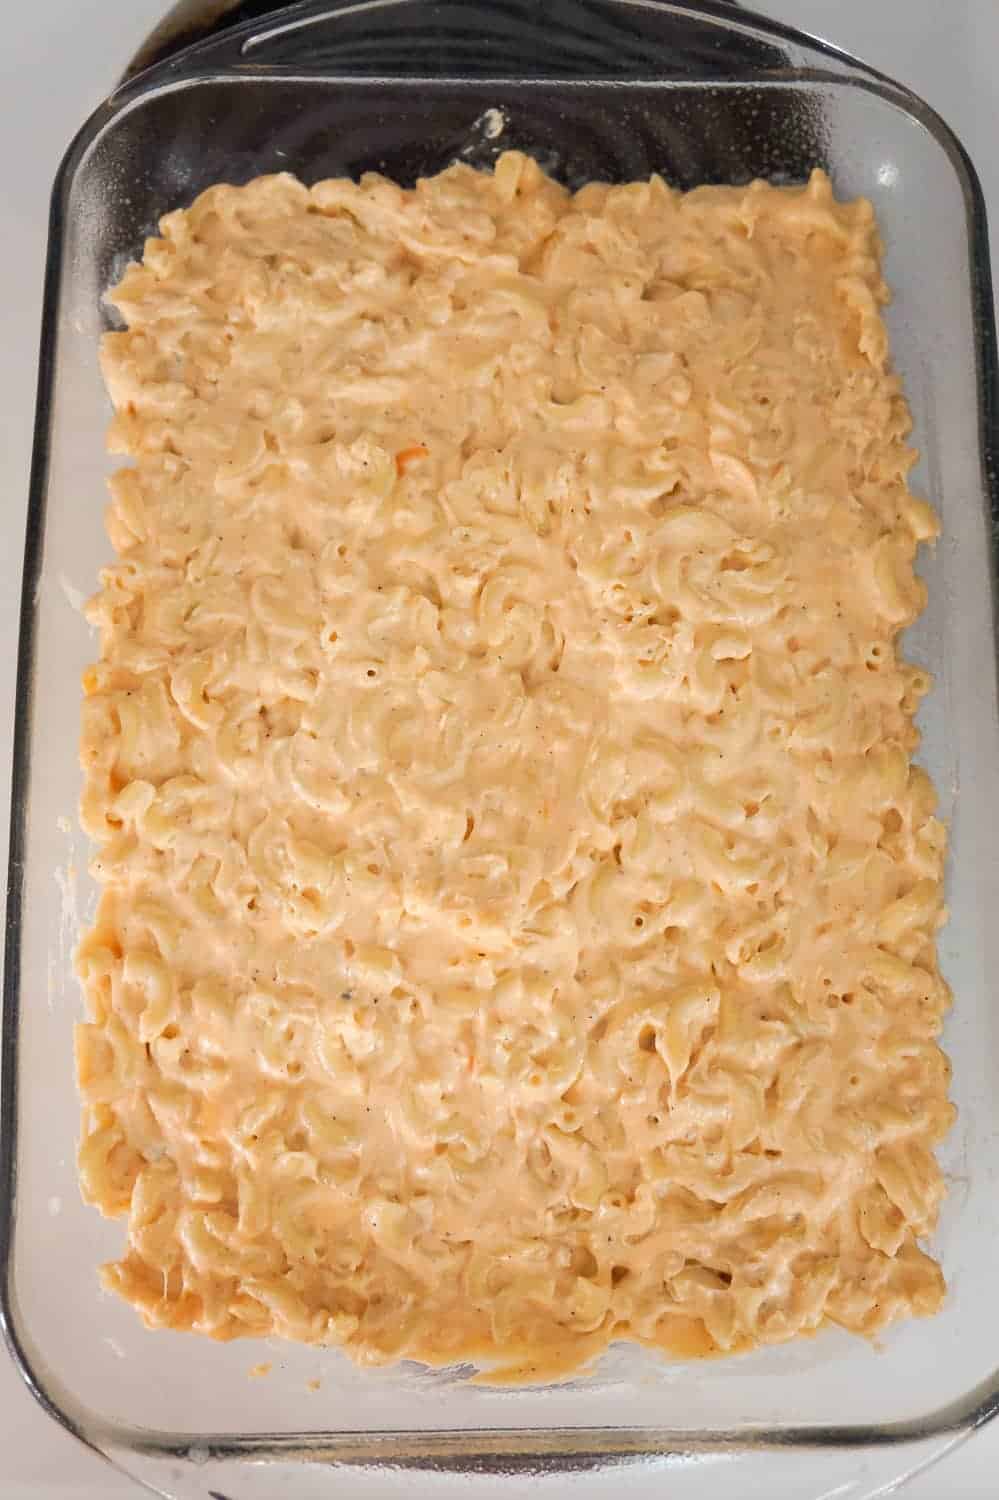 homemade macaroni and cheese in a baking dish